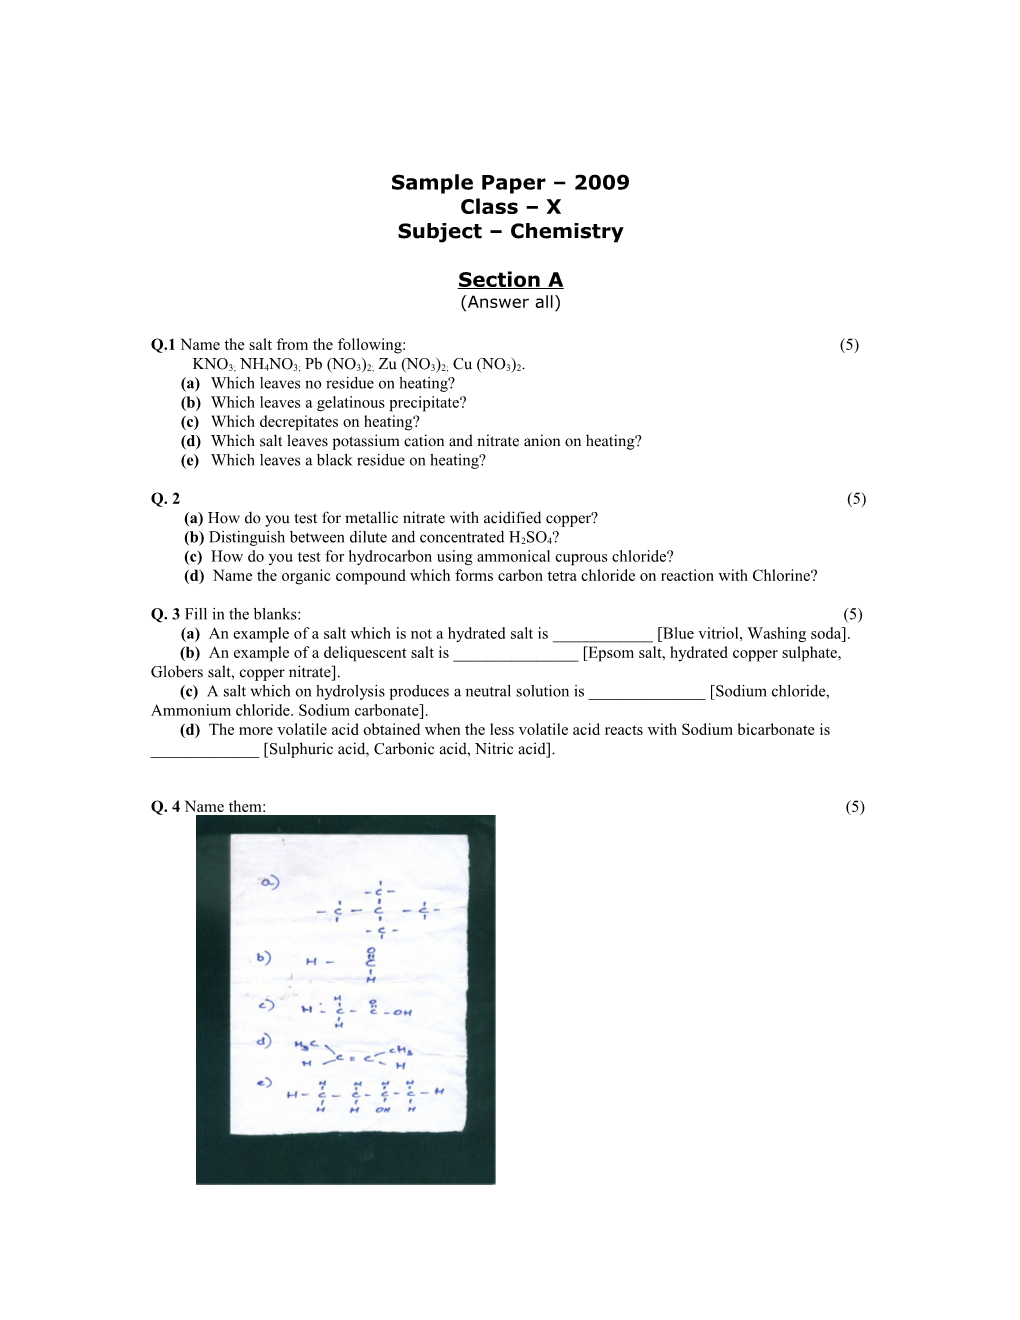 Sample Paper 2009 Class X Subject Chemistry